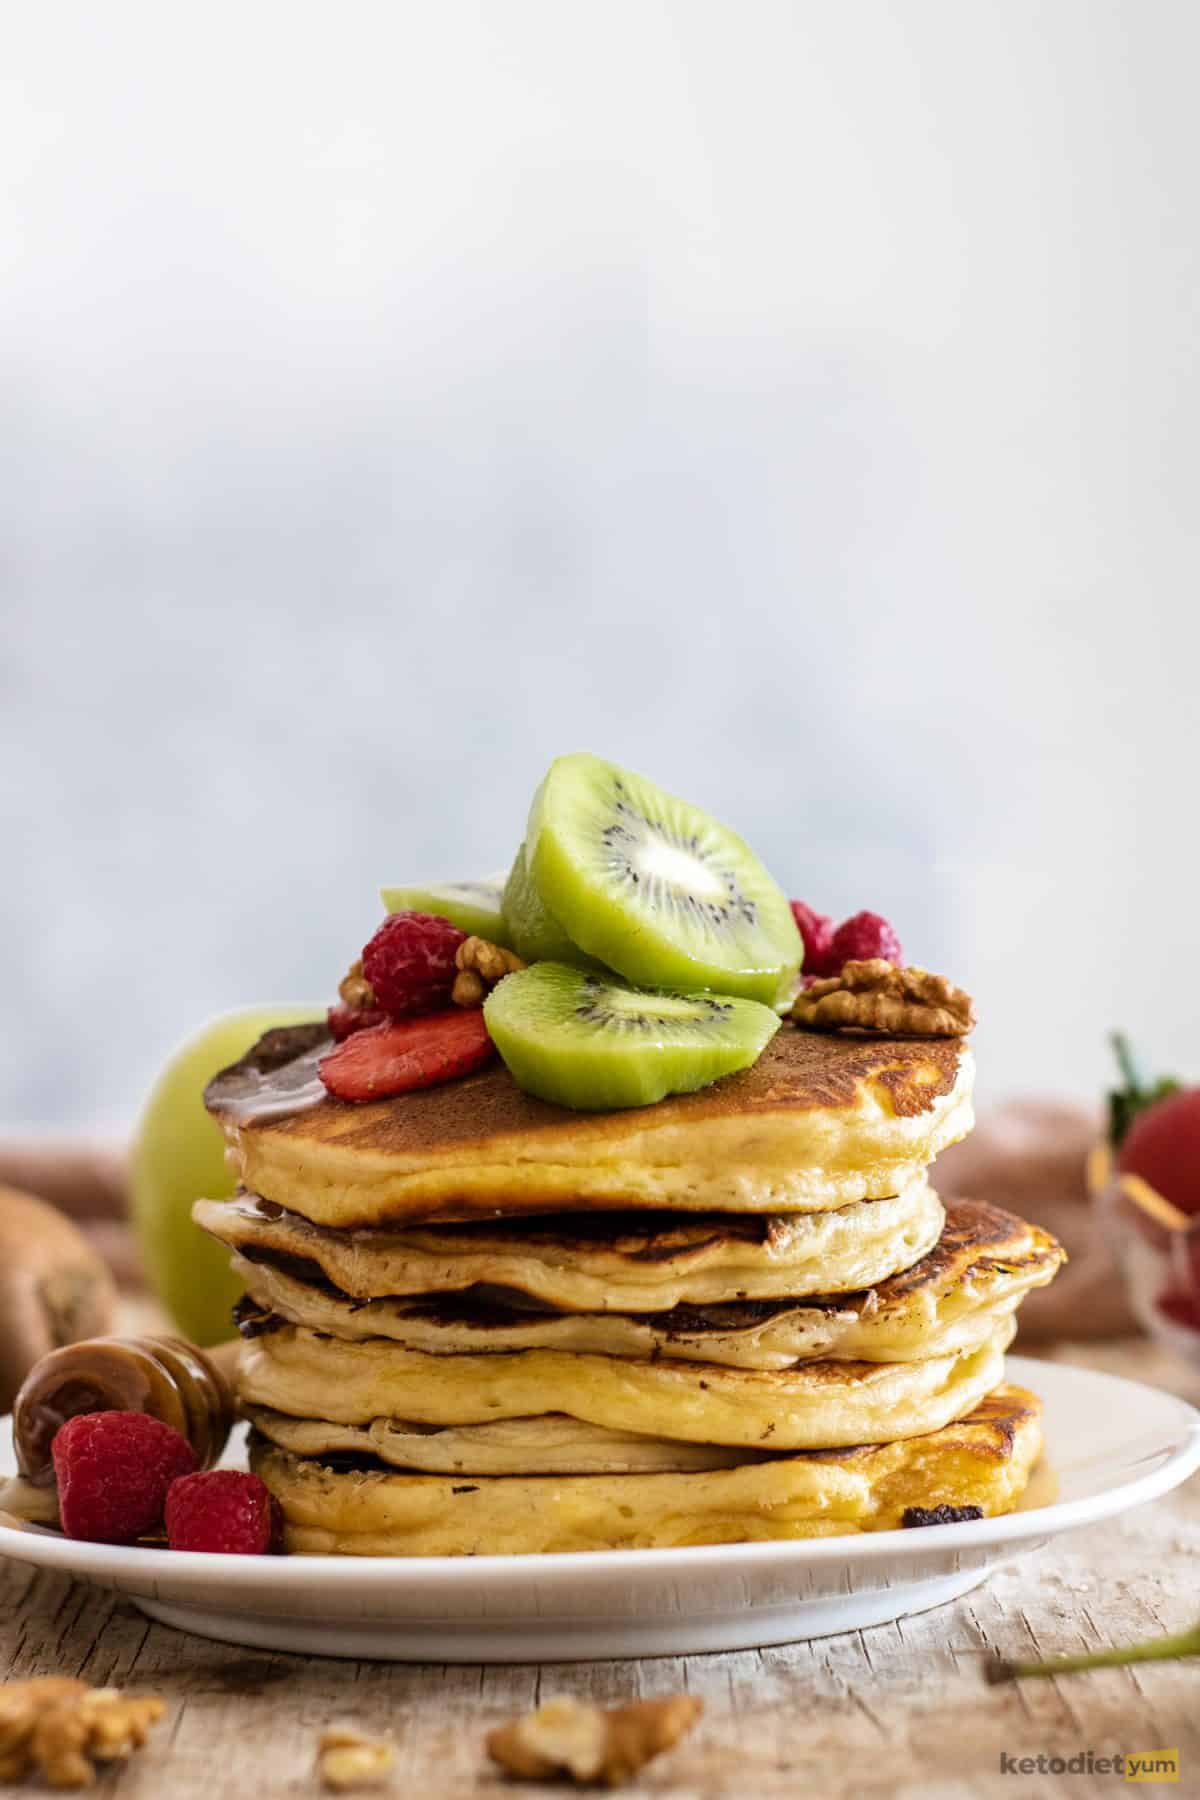 Fluffy keto pancakes topped with sliced strawberries and kiwifruit